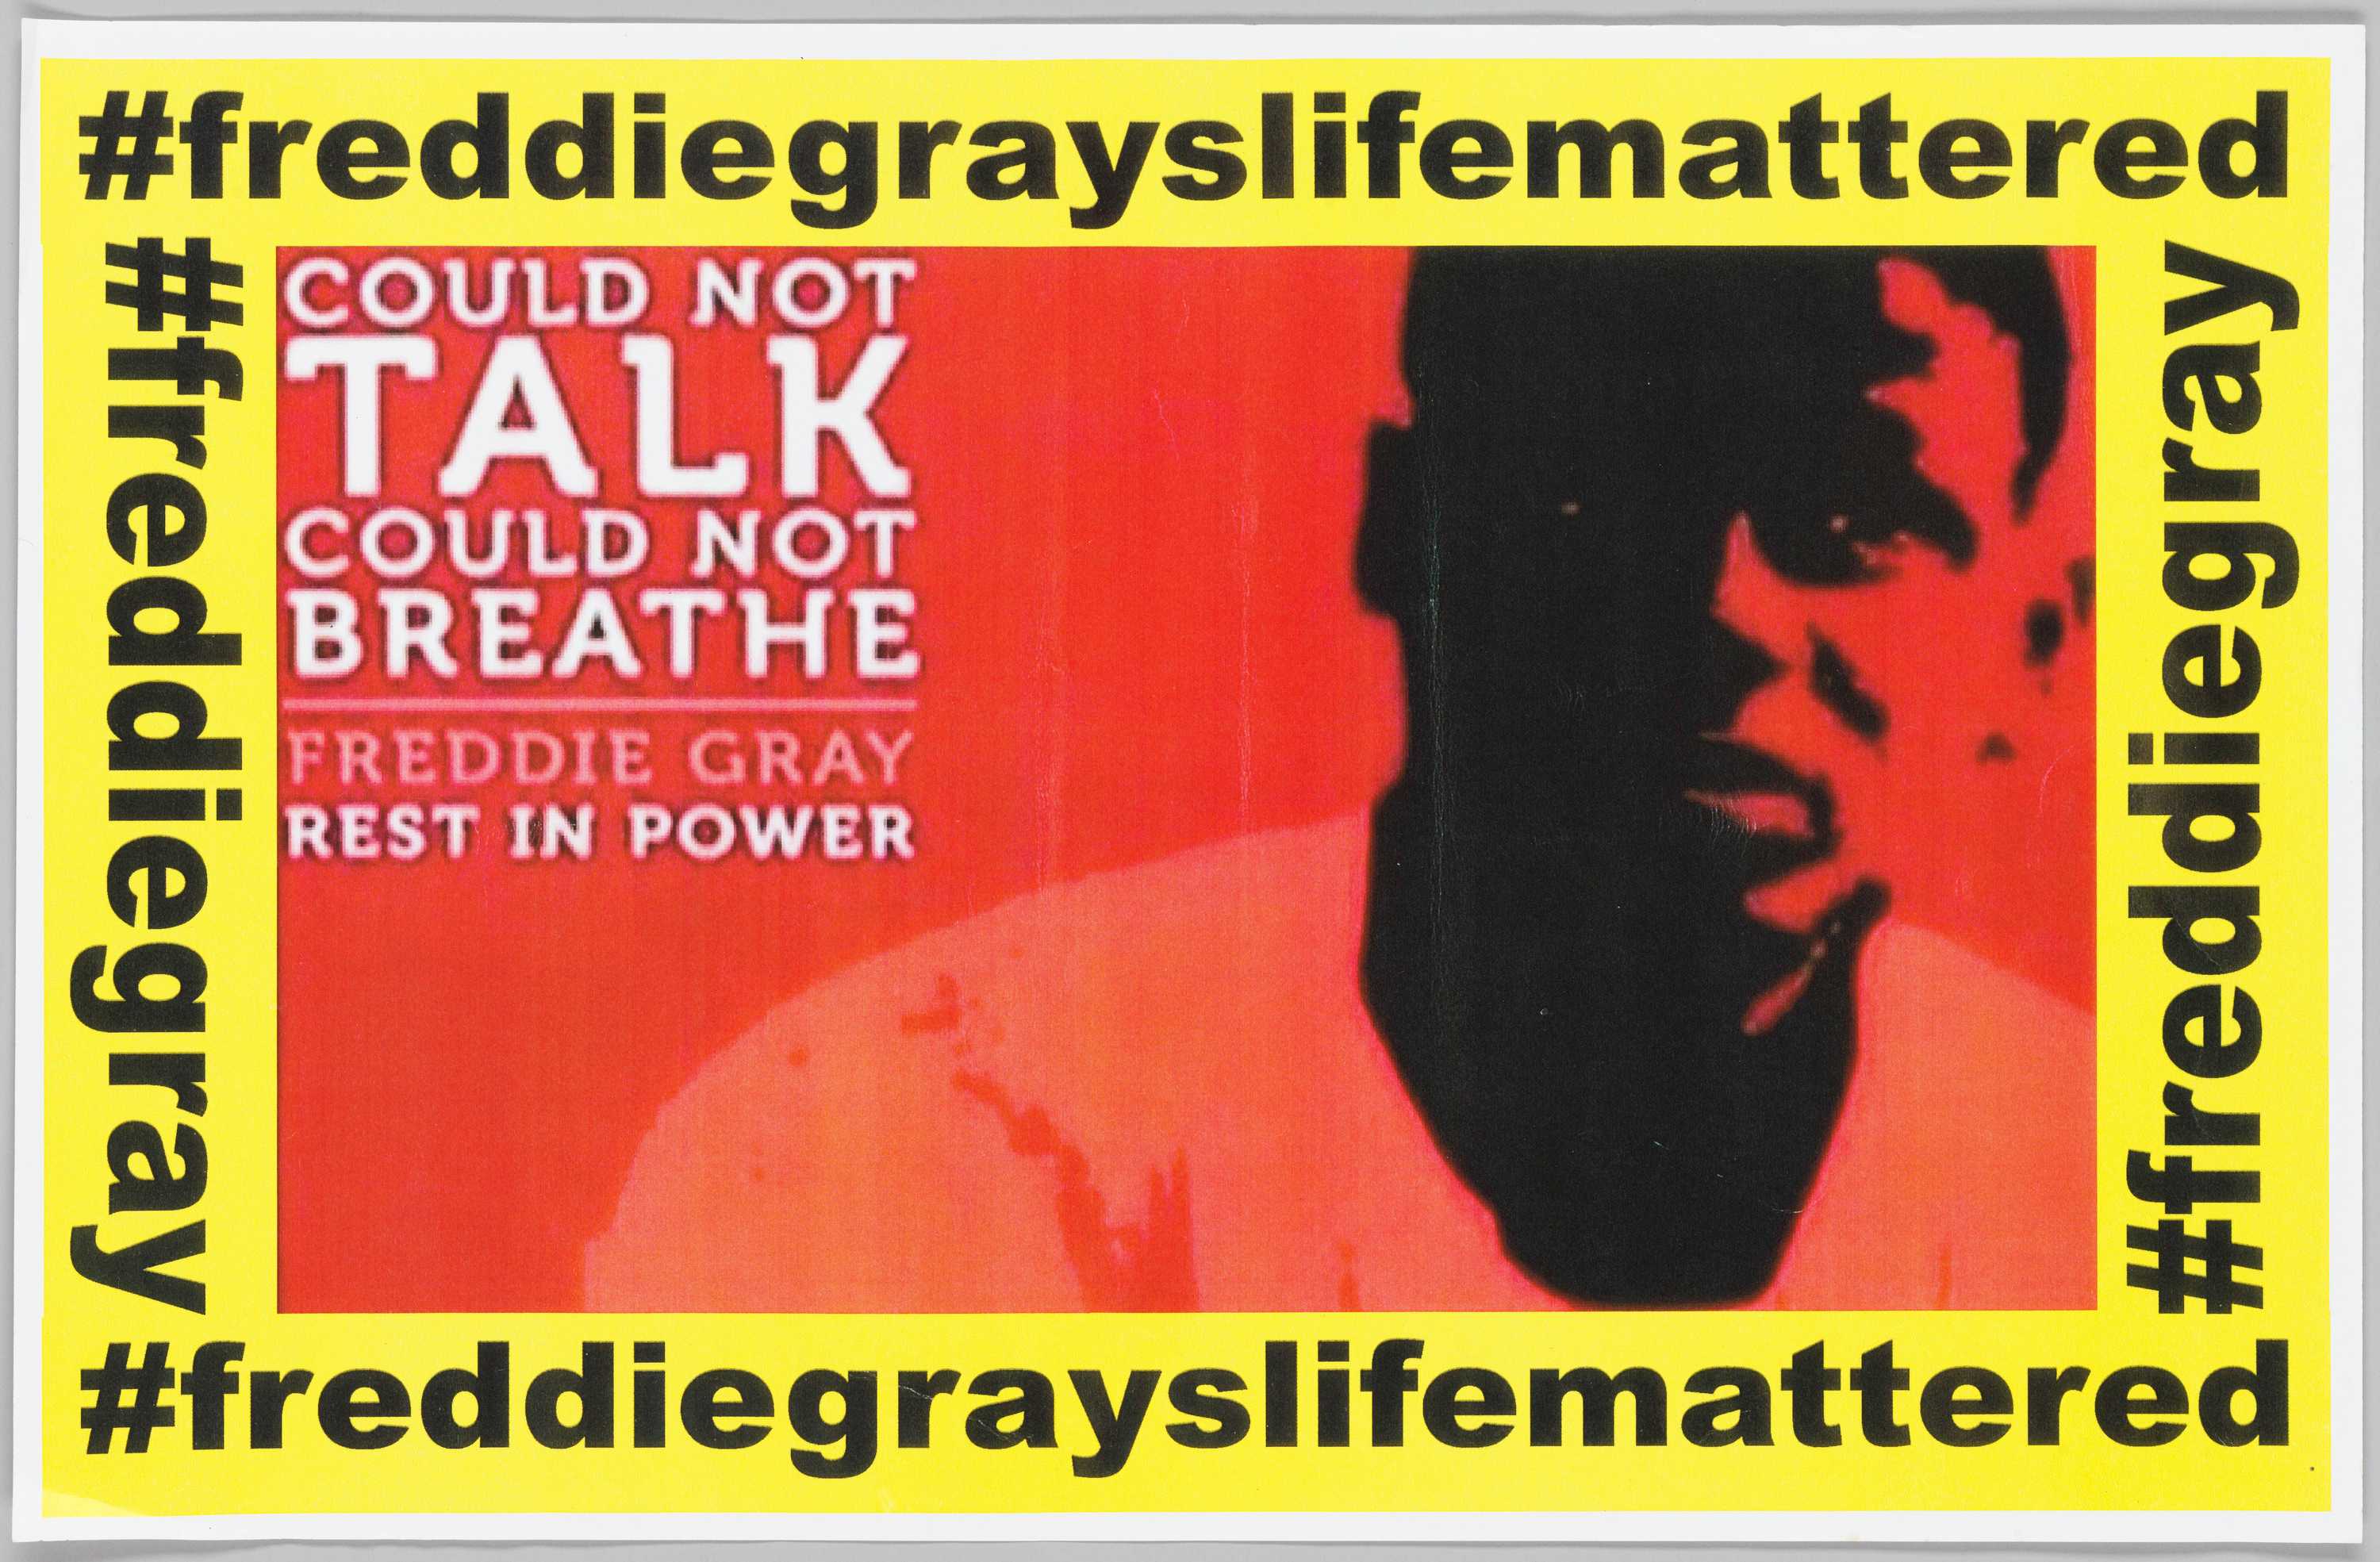 A flier with a yellow border and a red and black portrait of Freddie Gray Memorial flier.